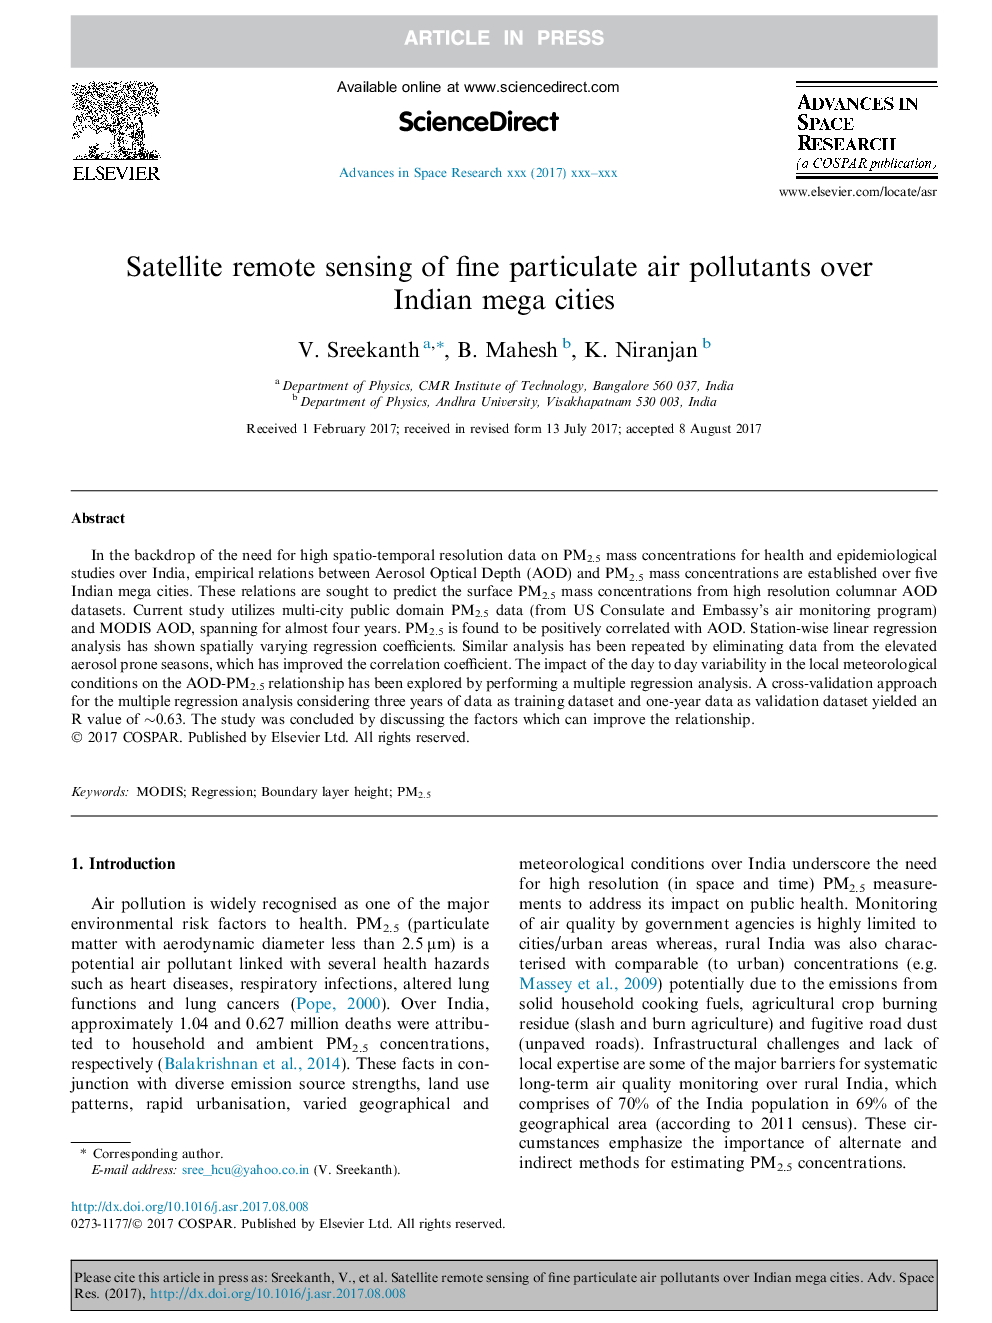 Satellite remote sensing of fine particulate air pollutants over Indian mega cities